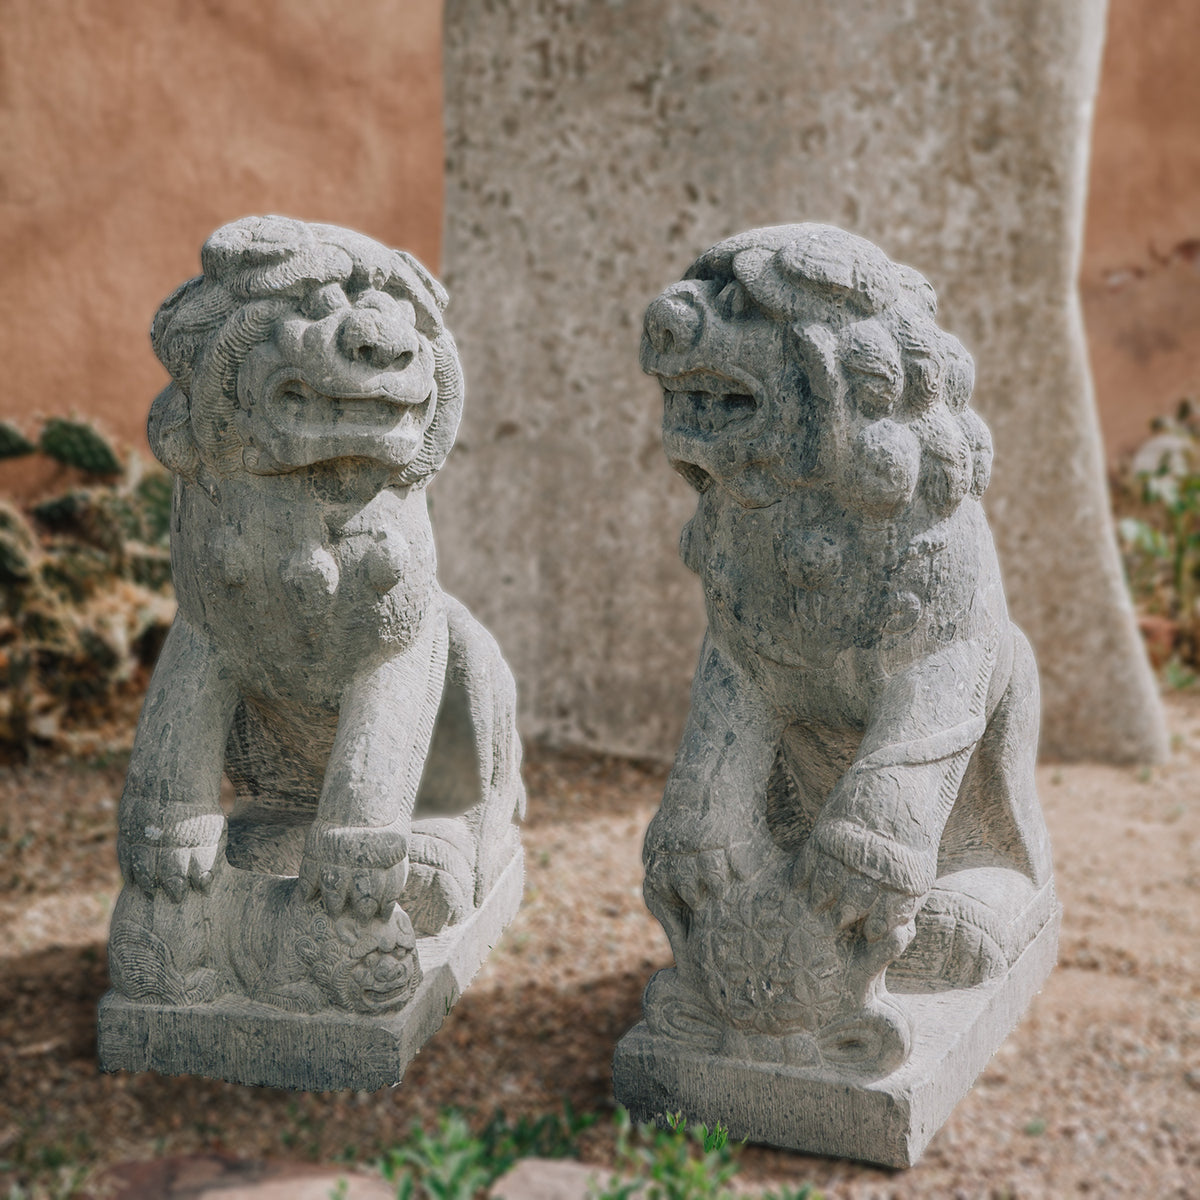 Hand Carved Antique Stone Lions image 1 of 3